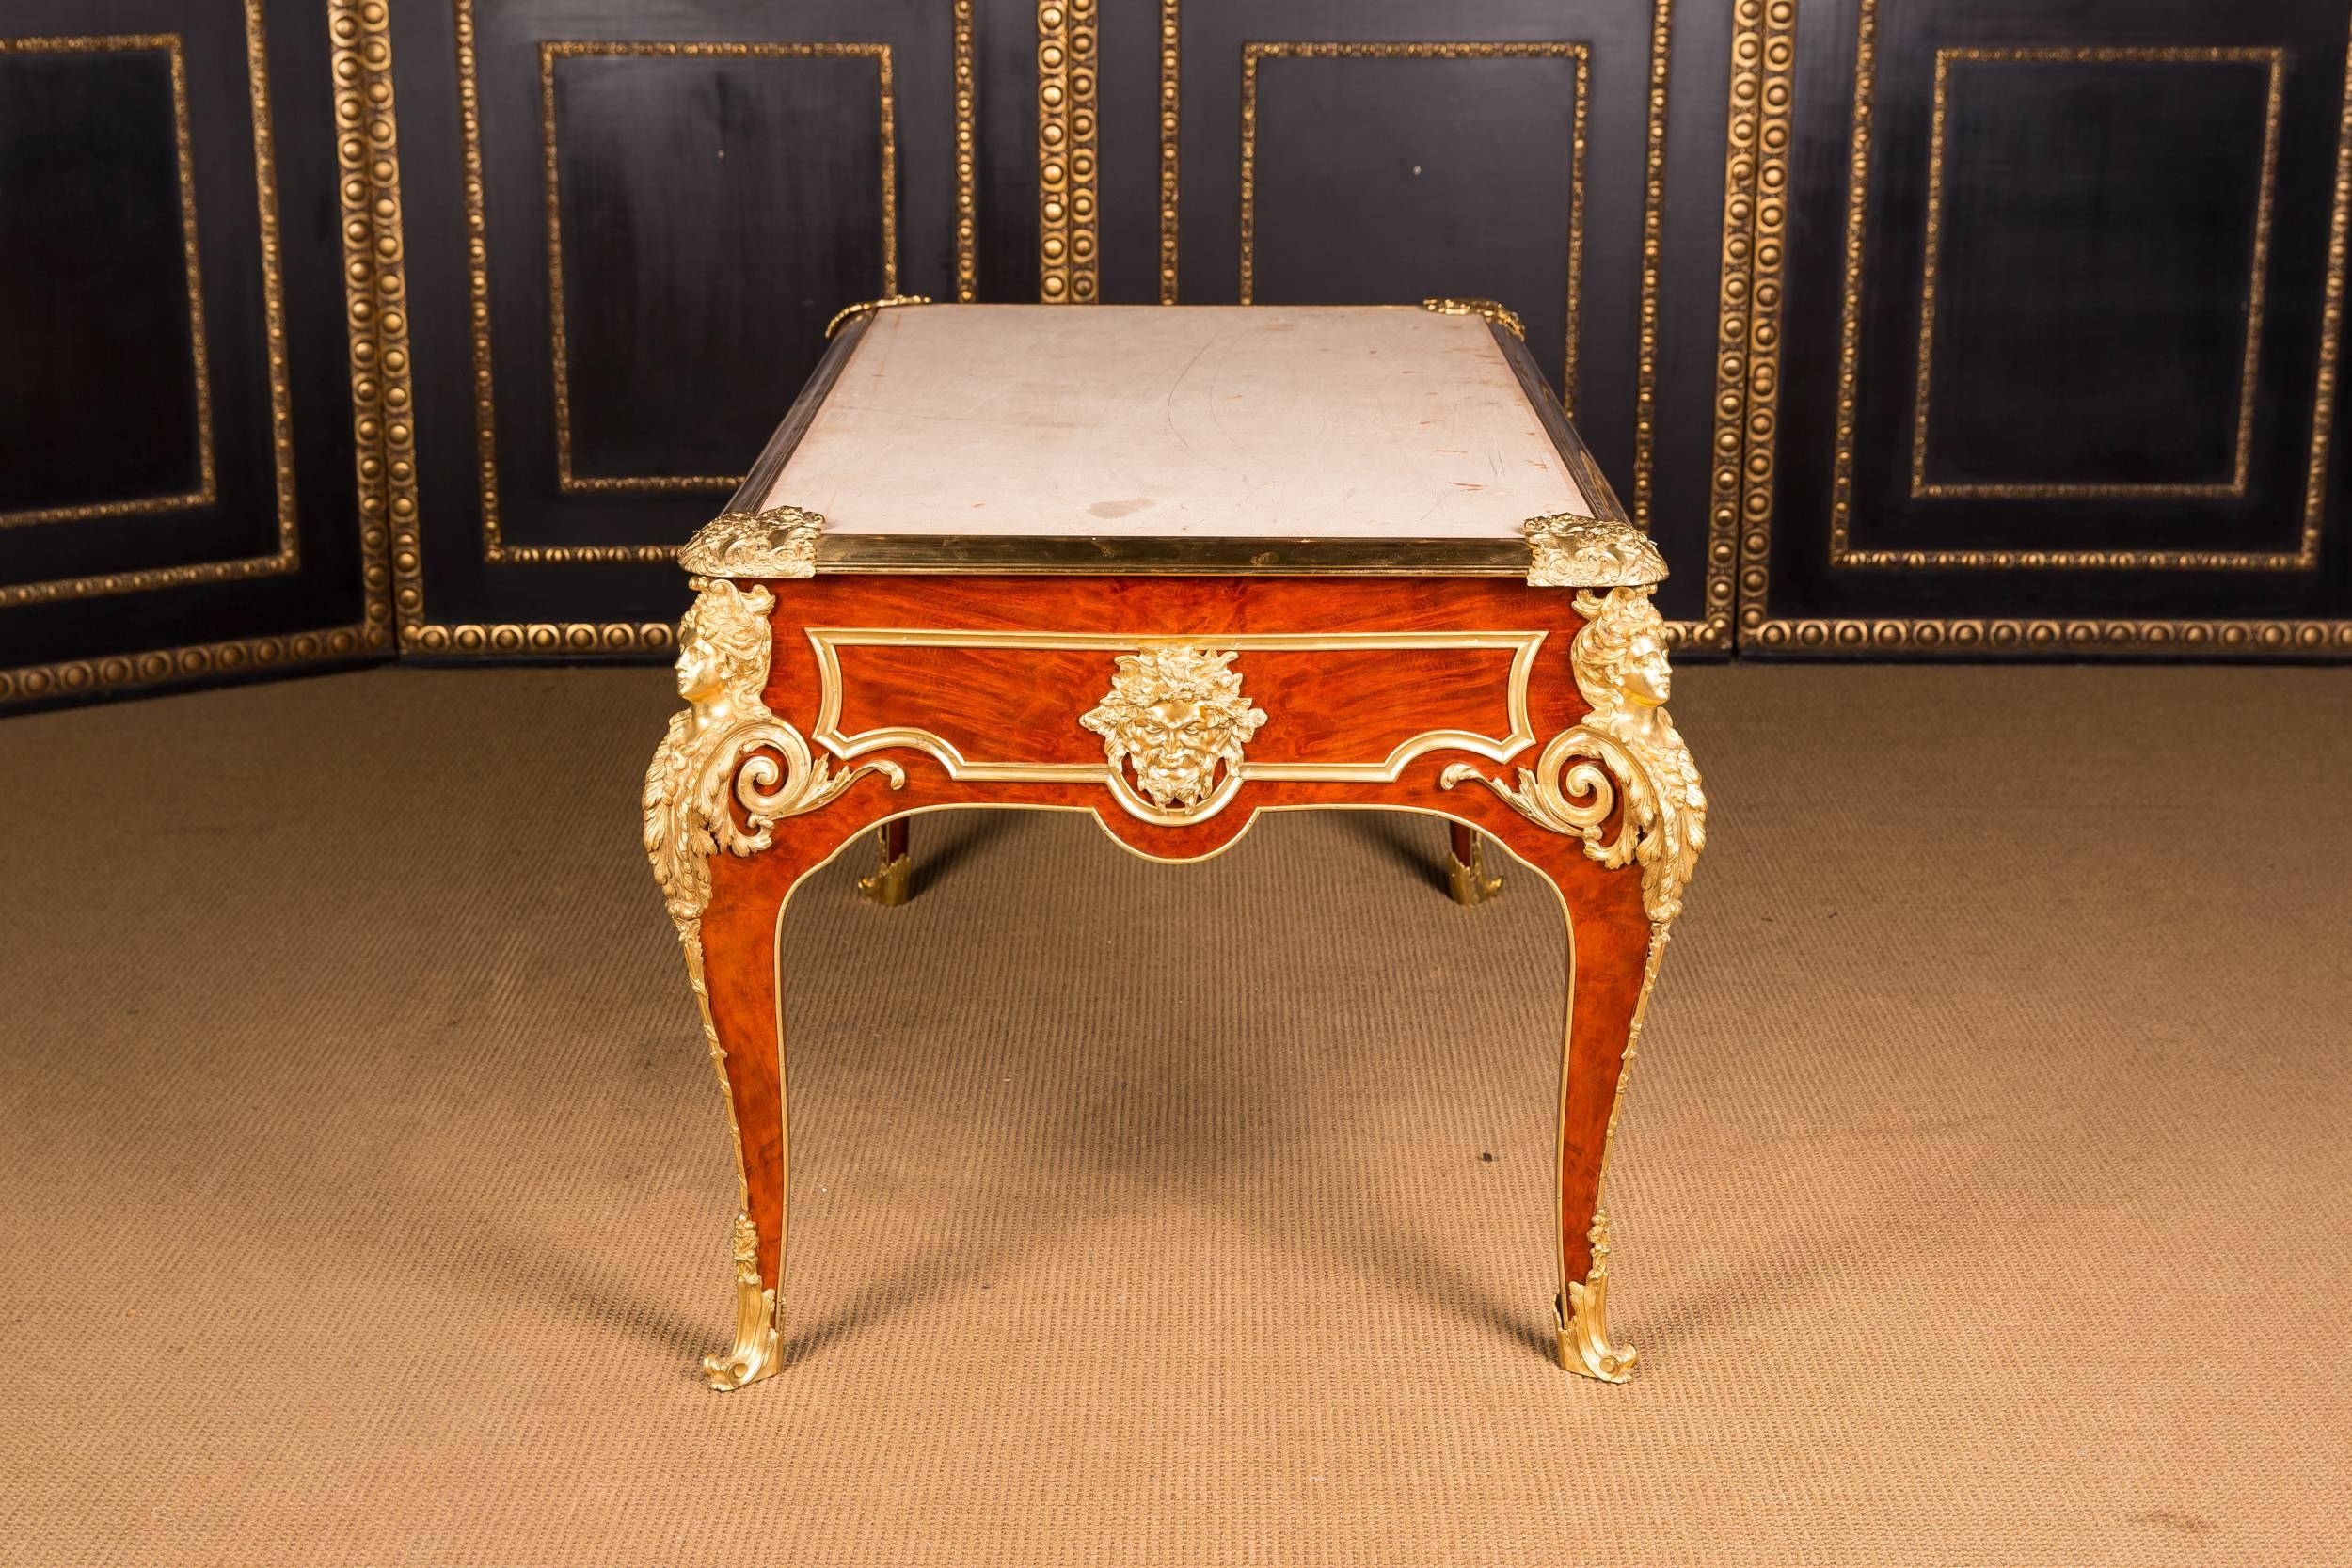 Majestic French Bureau Plat Desk According to Andre C. Boulle 1